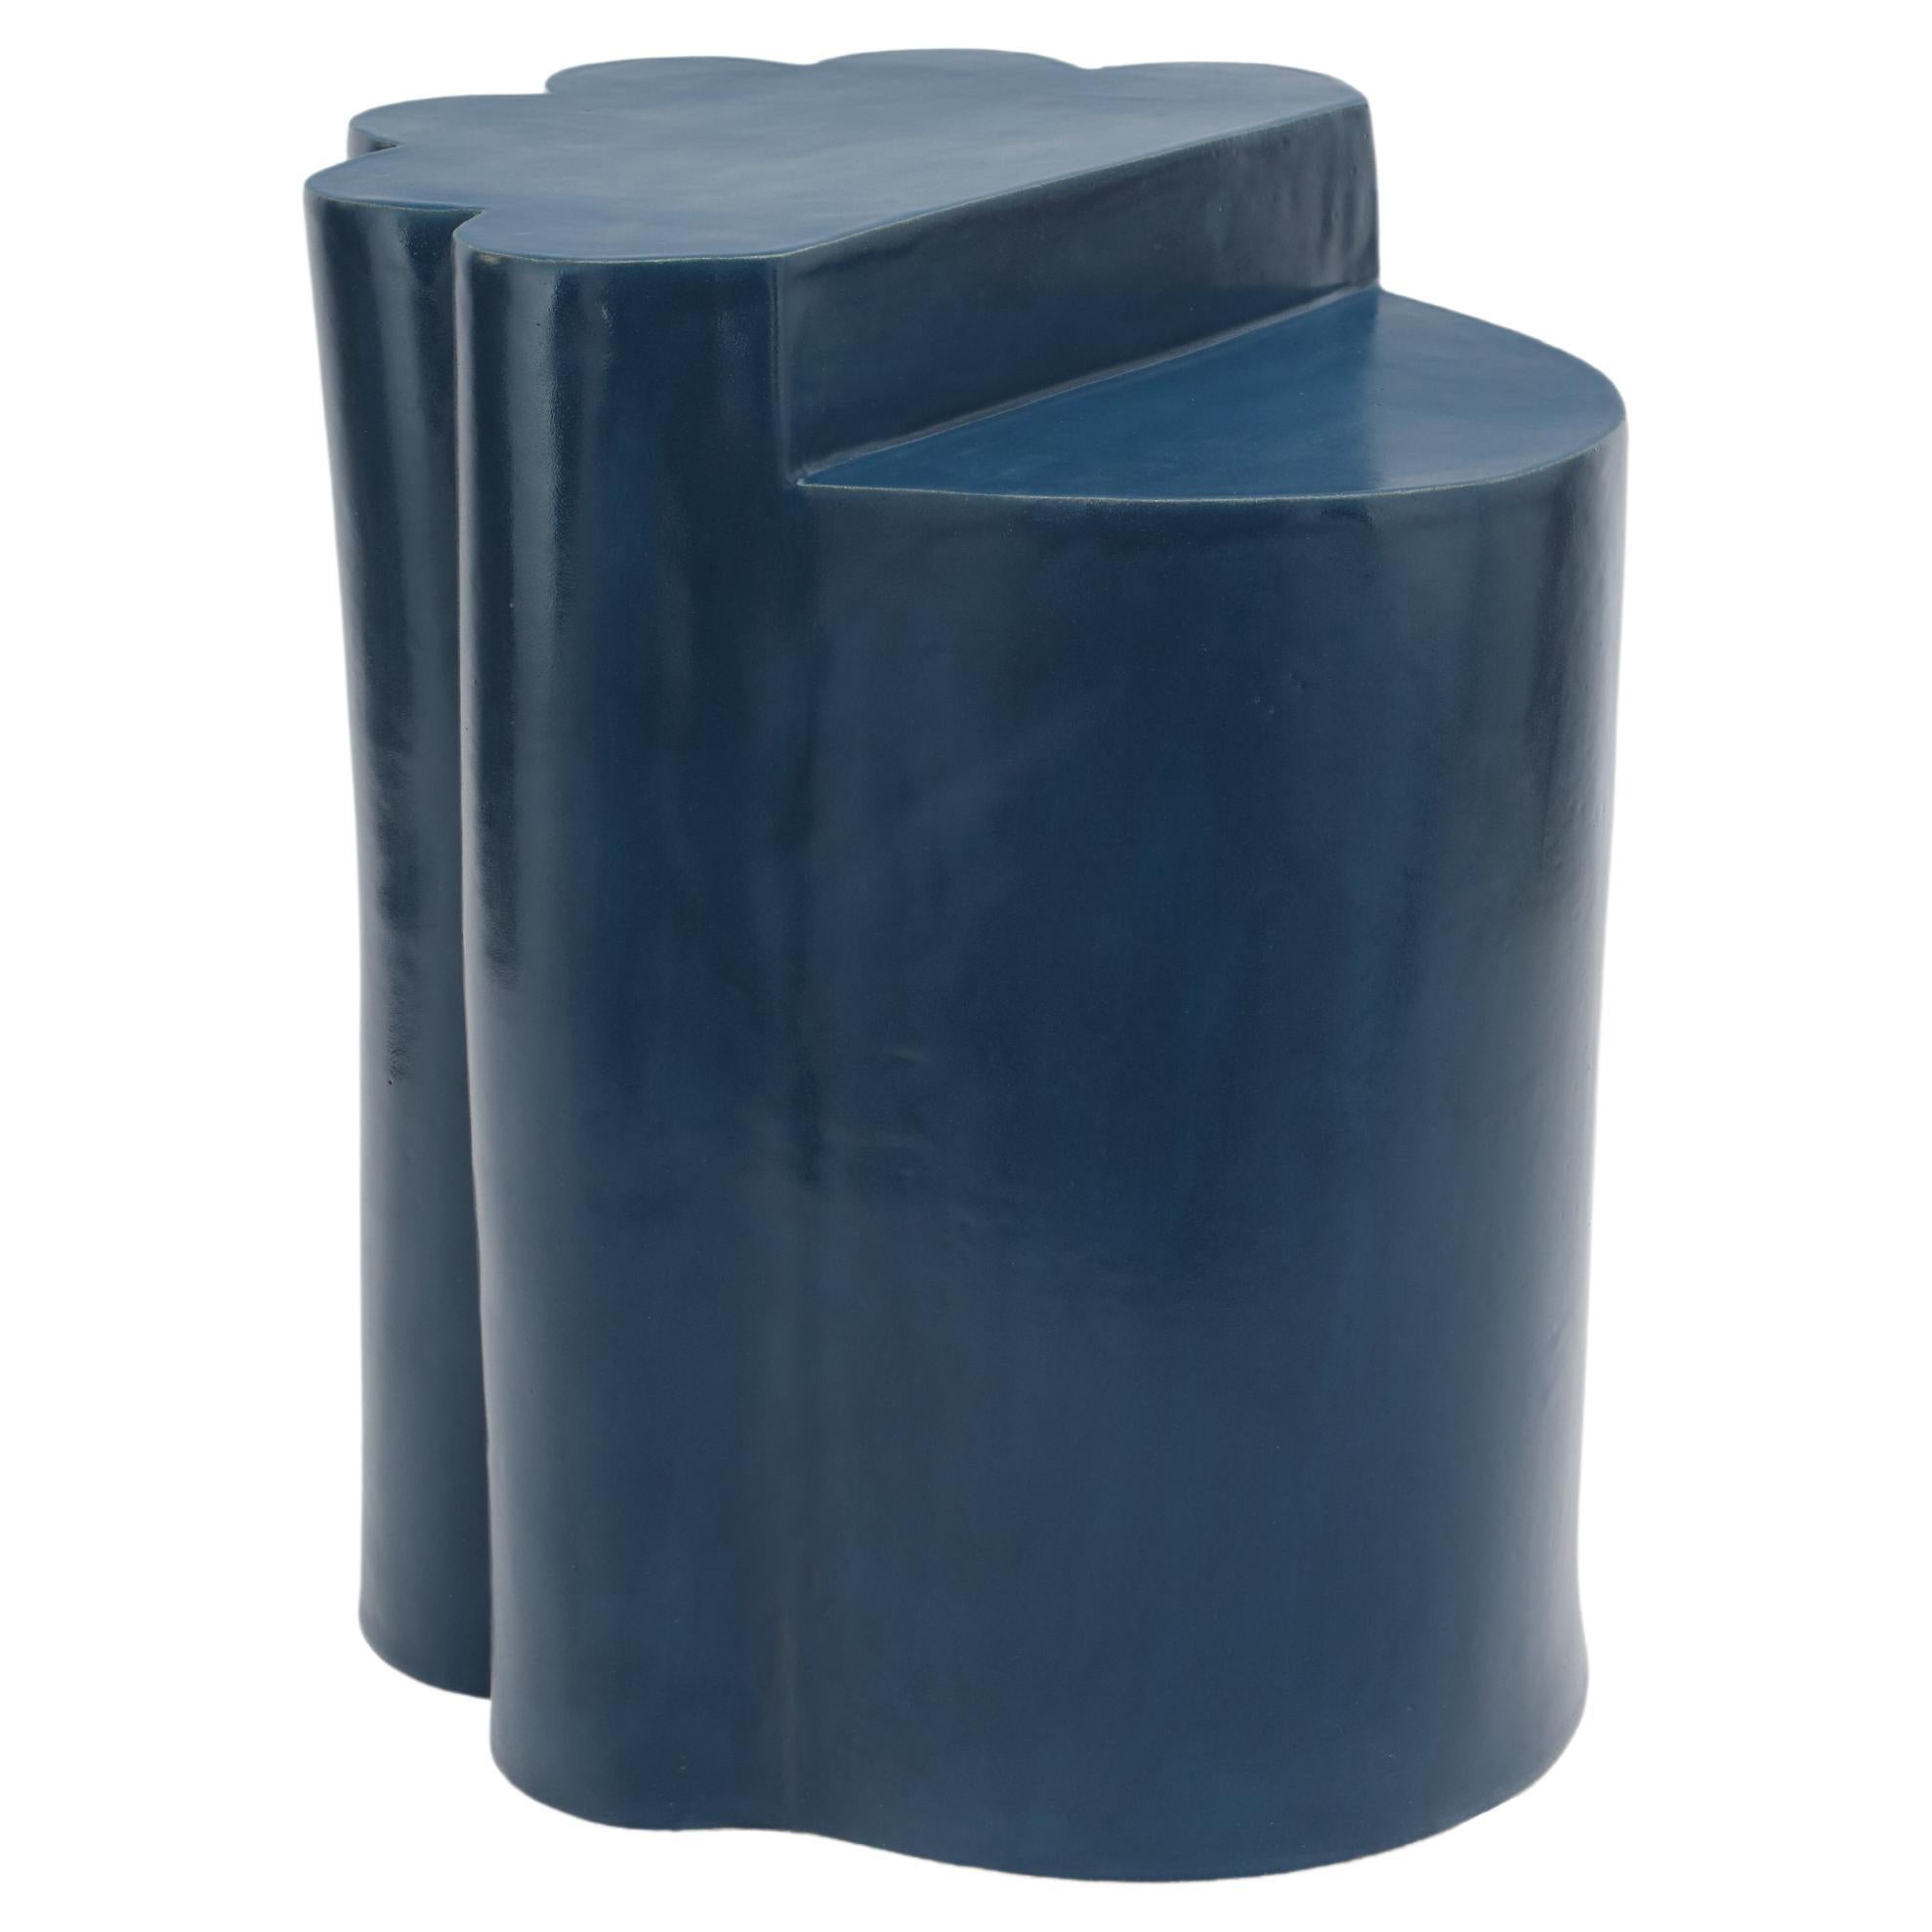 Ceramic Ledge Side Table & Stool in Almost Teal by BZIPPY